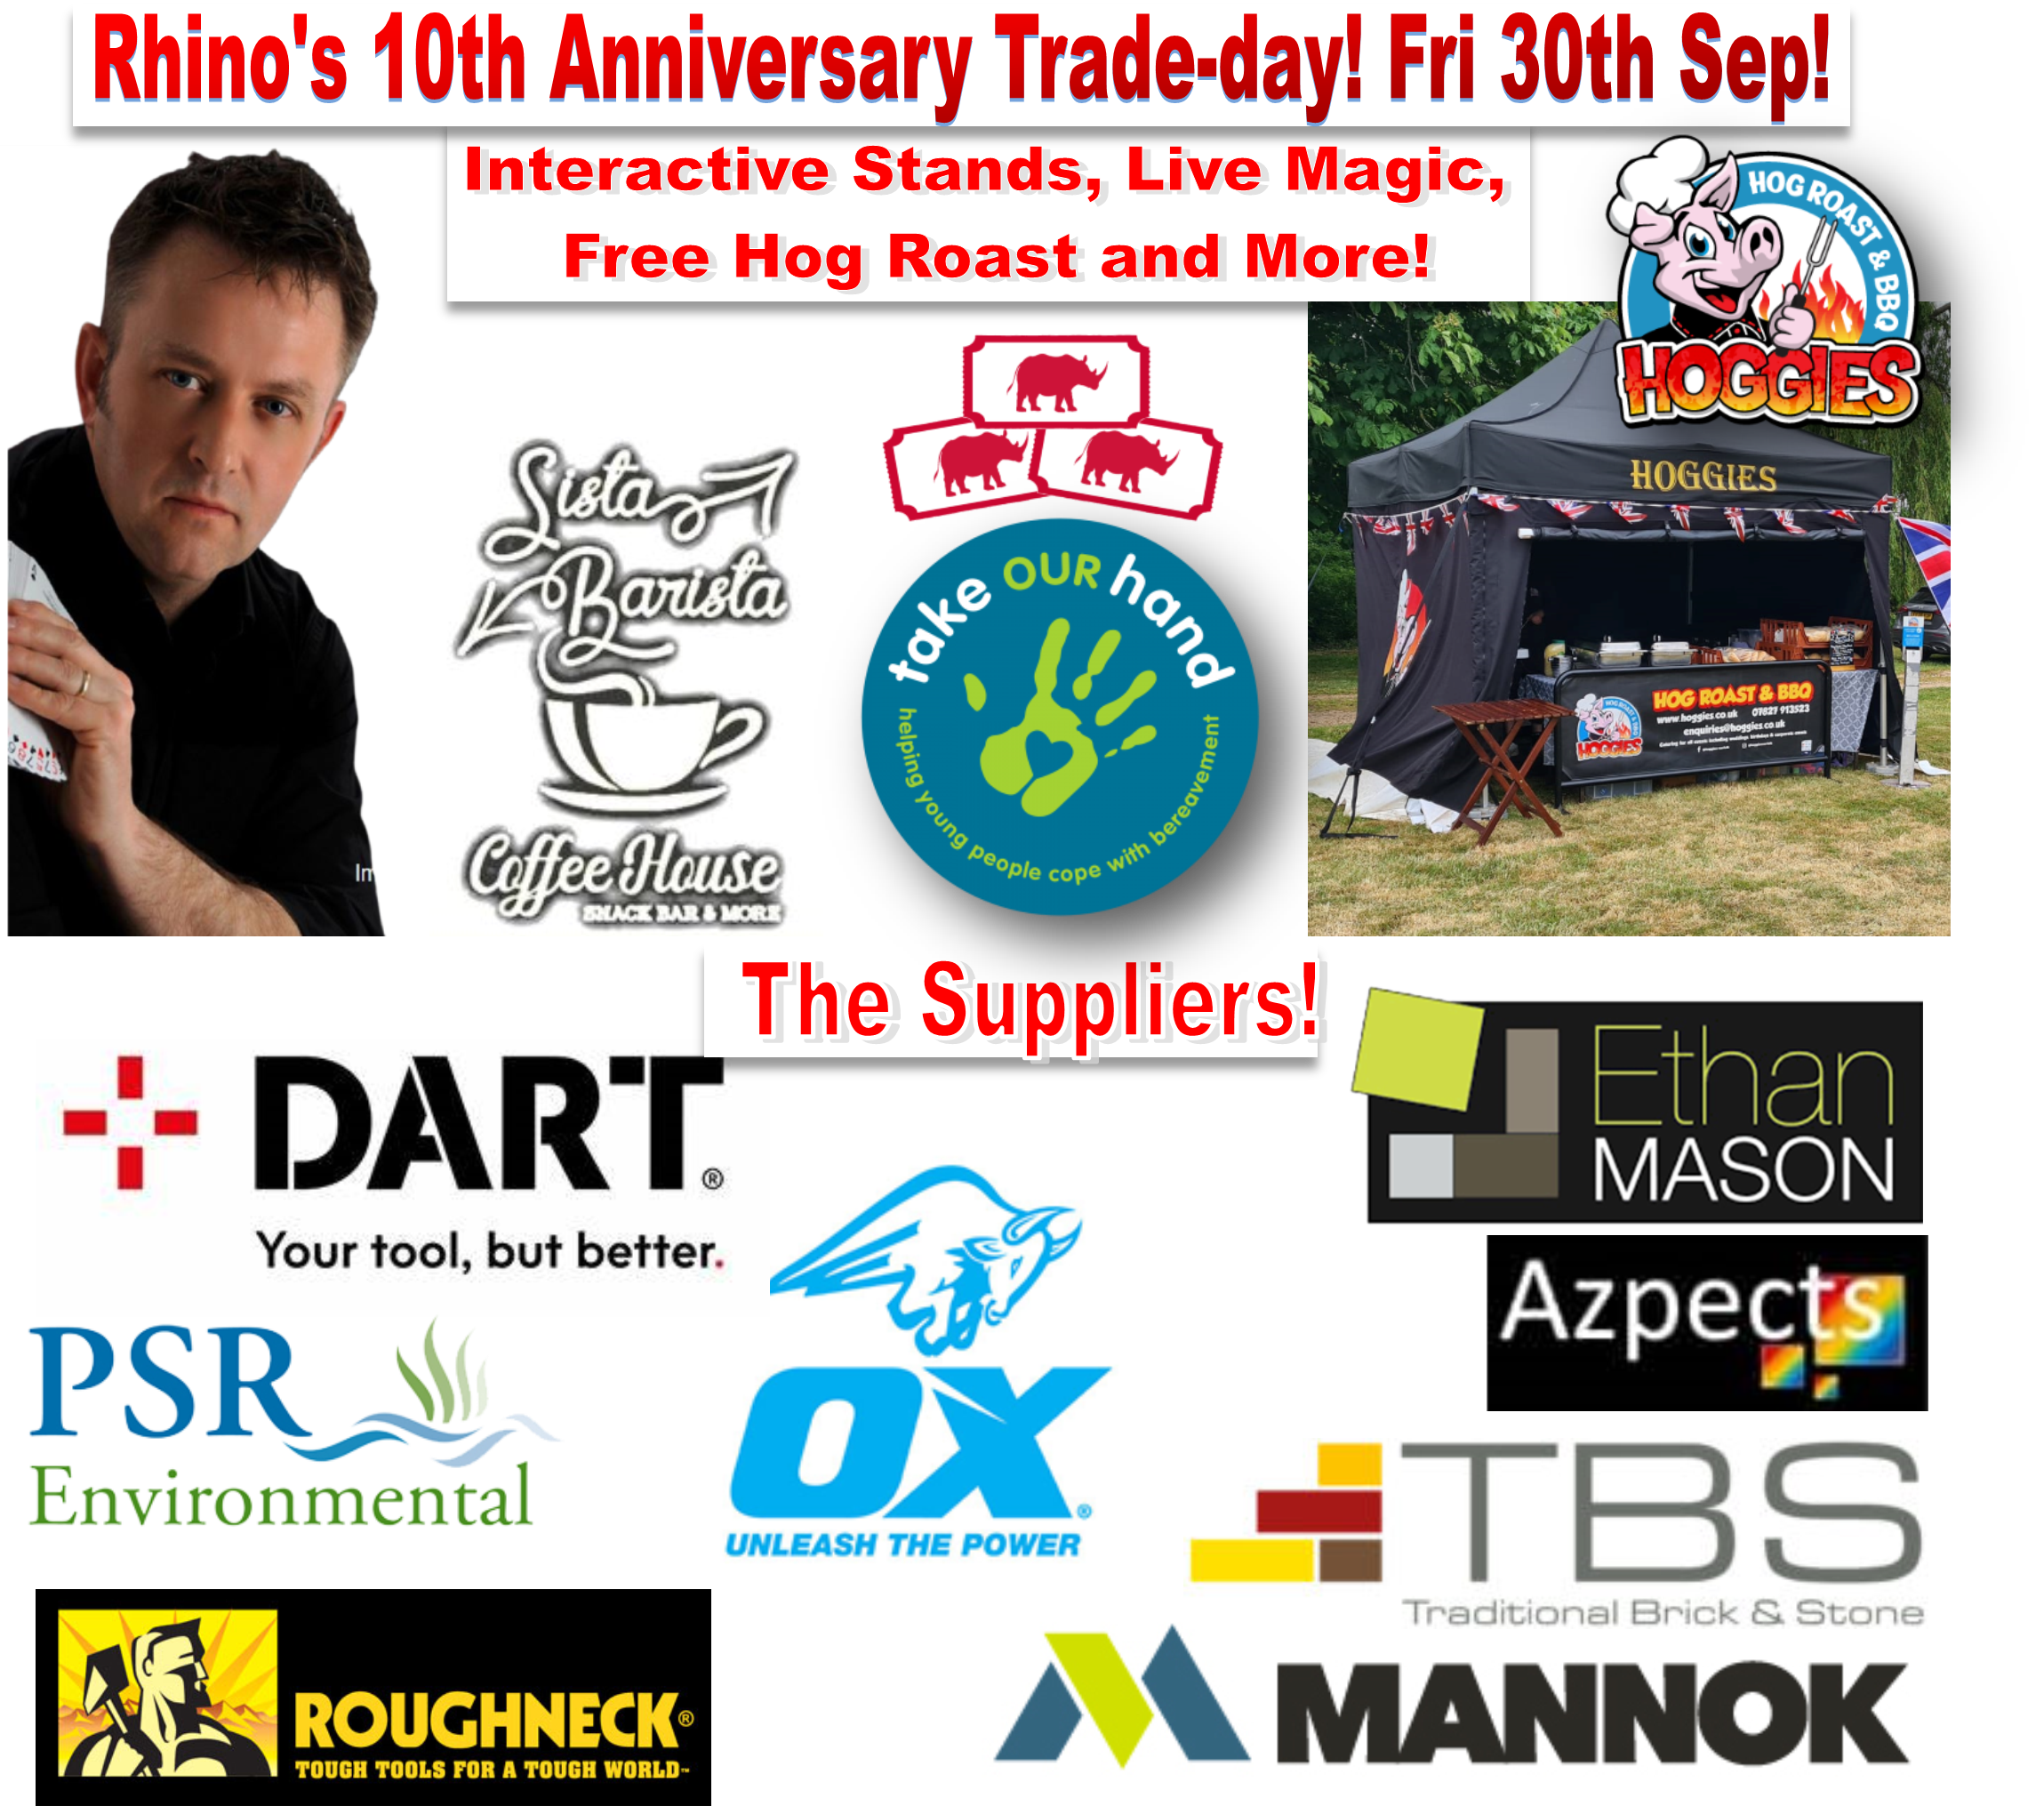 10th Anniversary Trade-Day - 30th September!